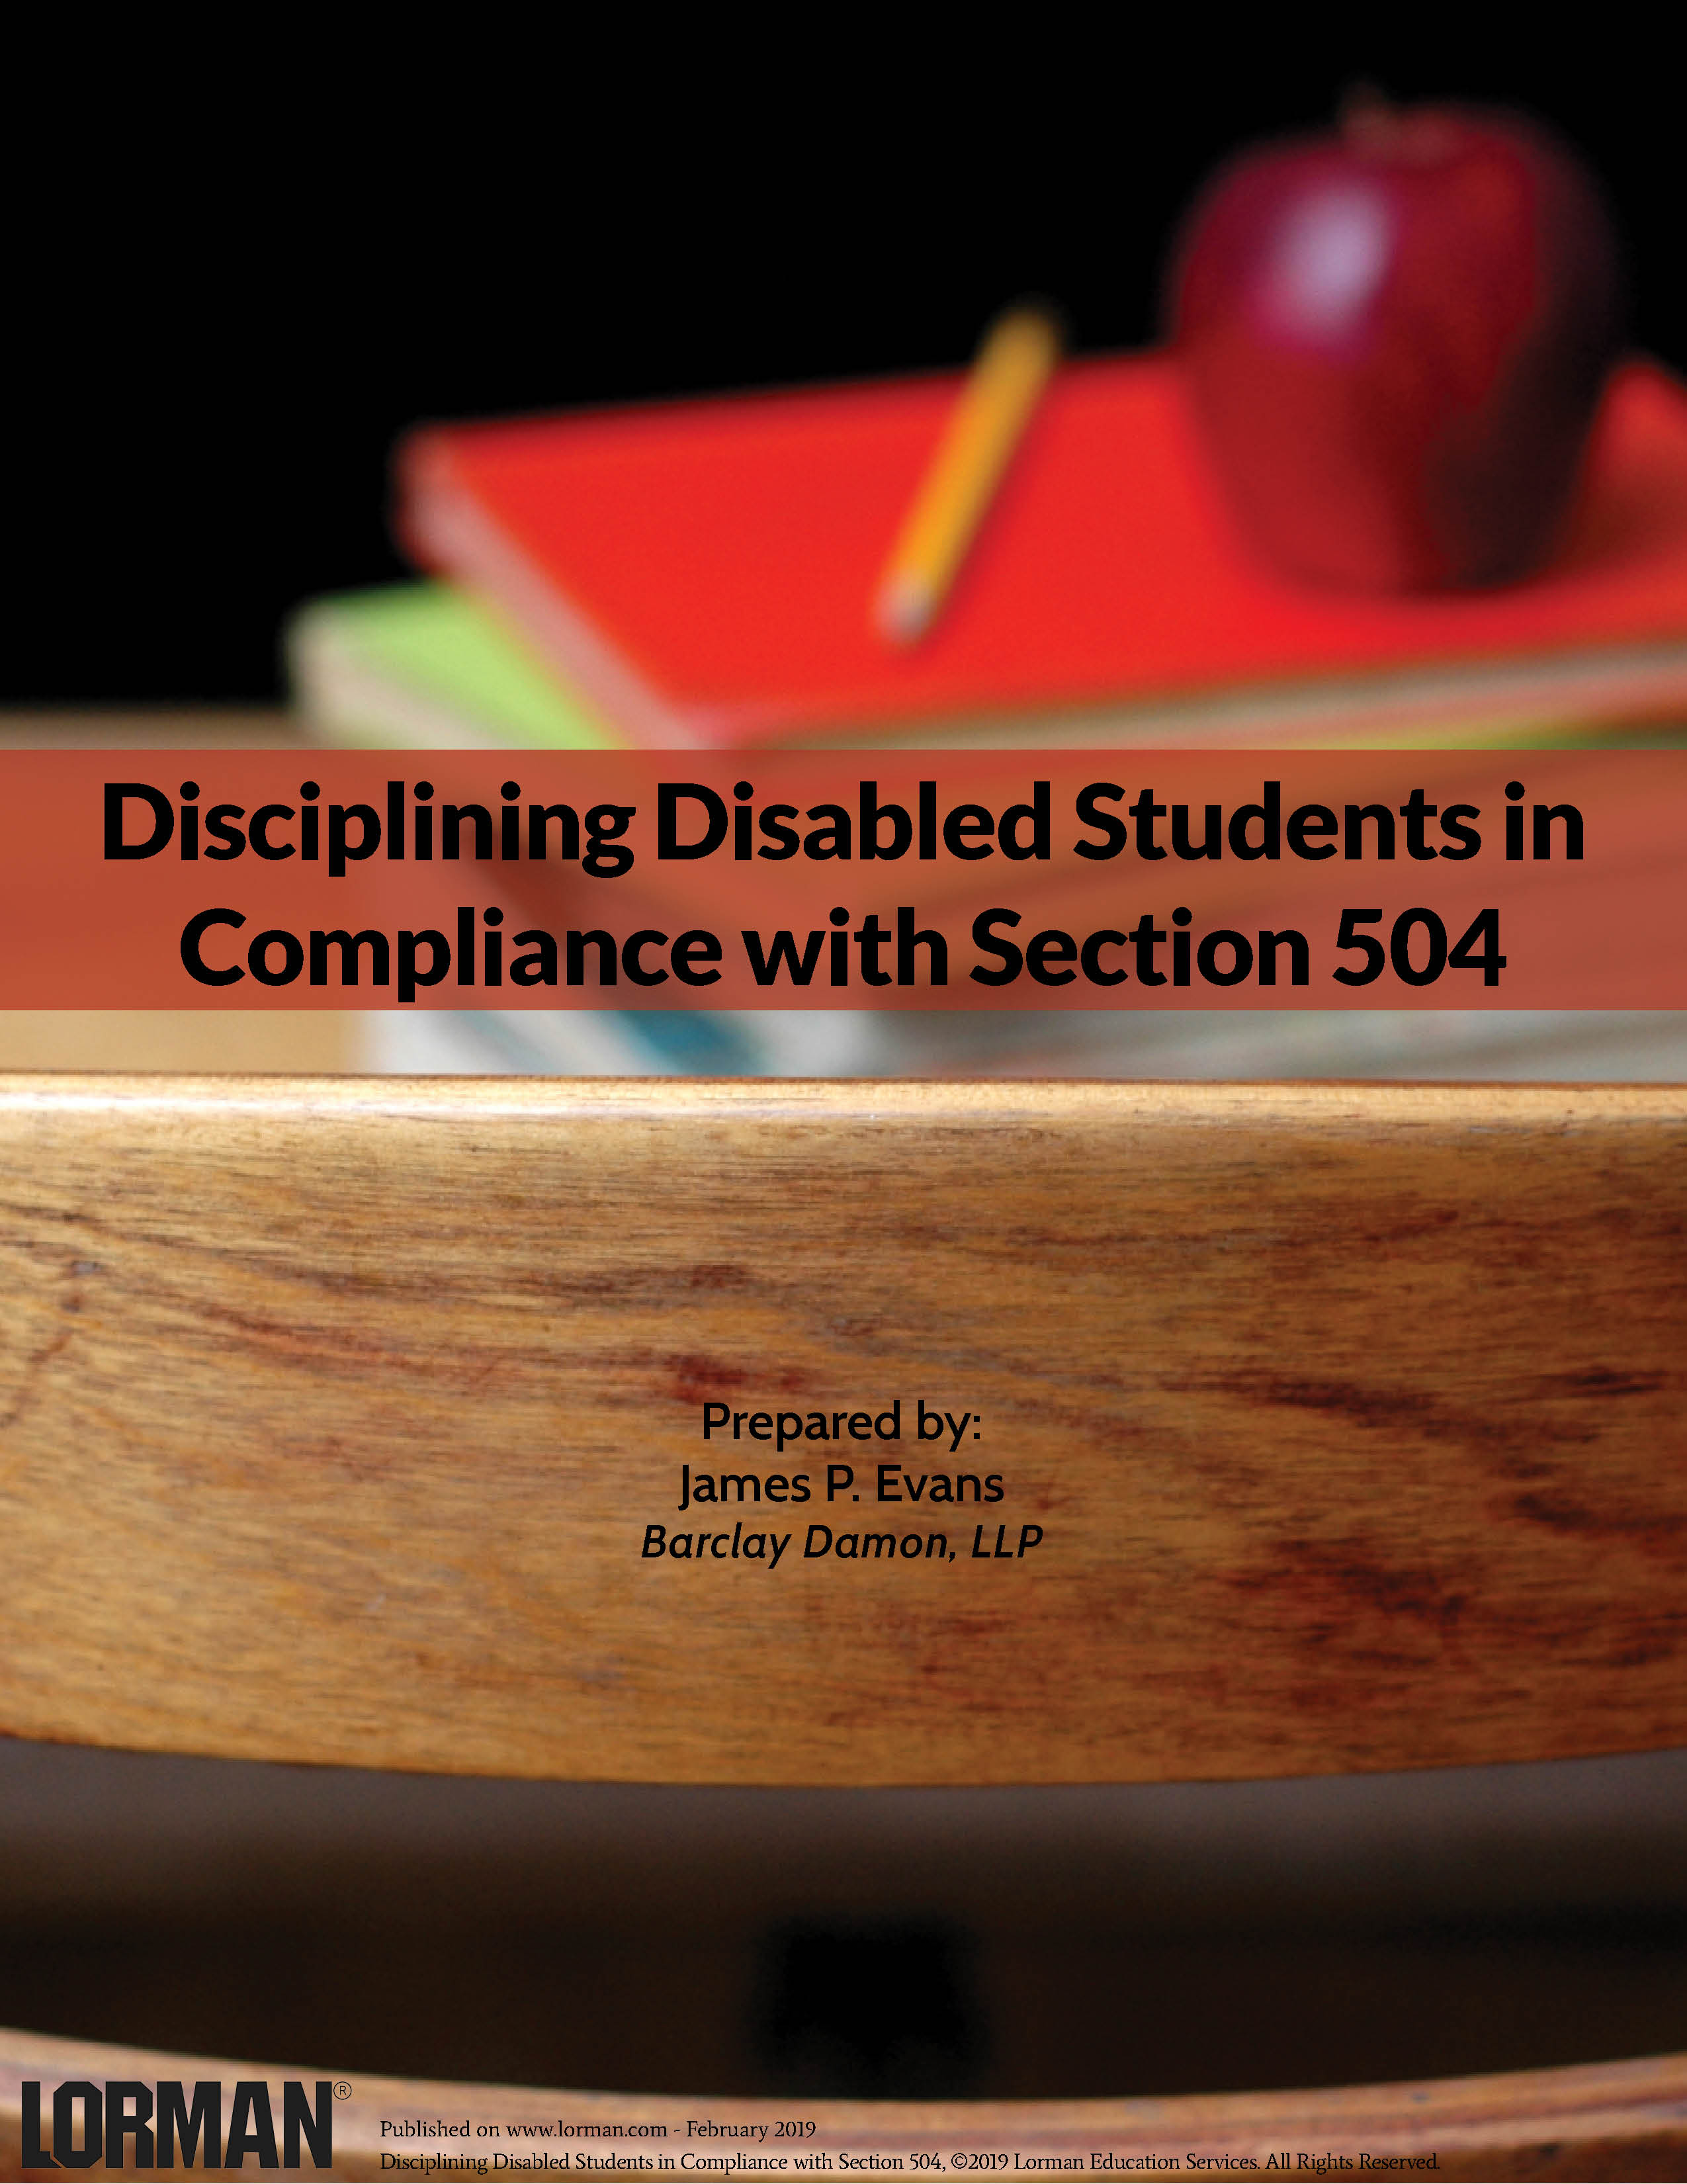 Disciplining Disabled Students in Compliance with Section 504